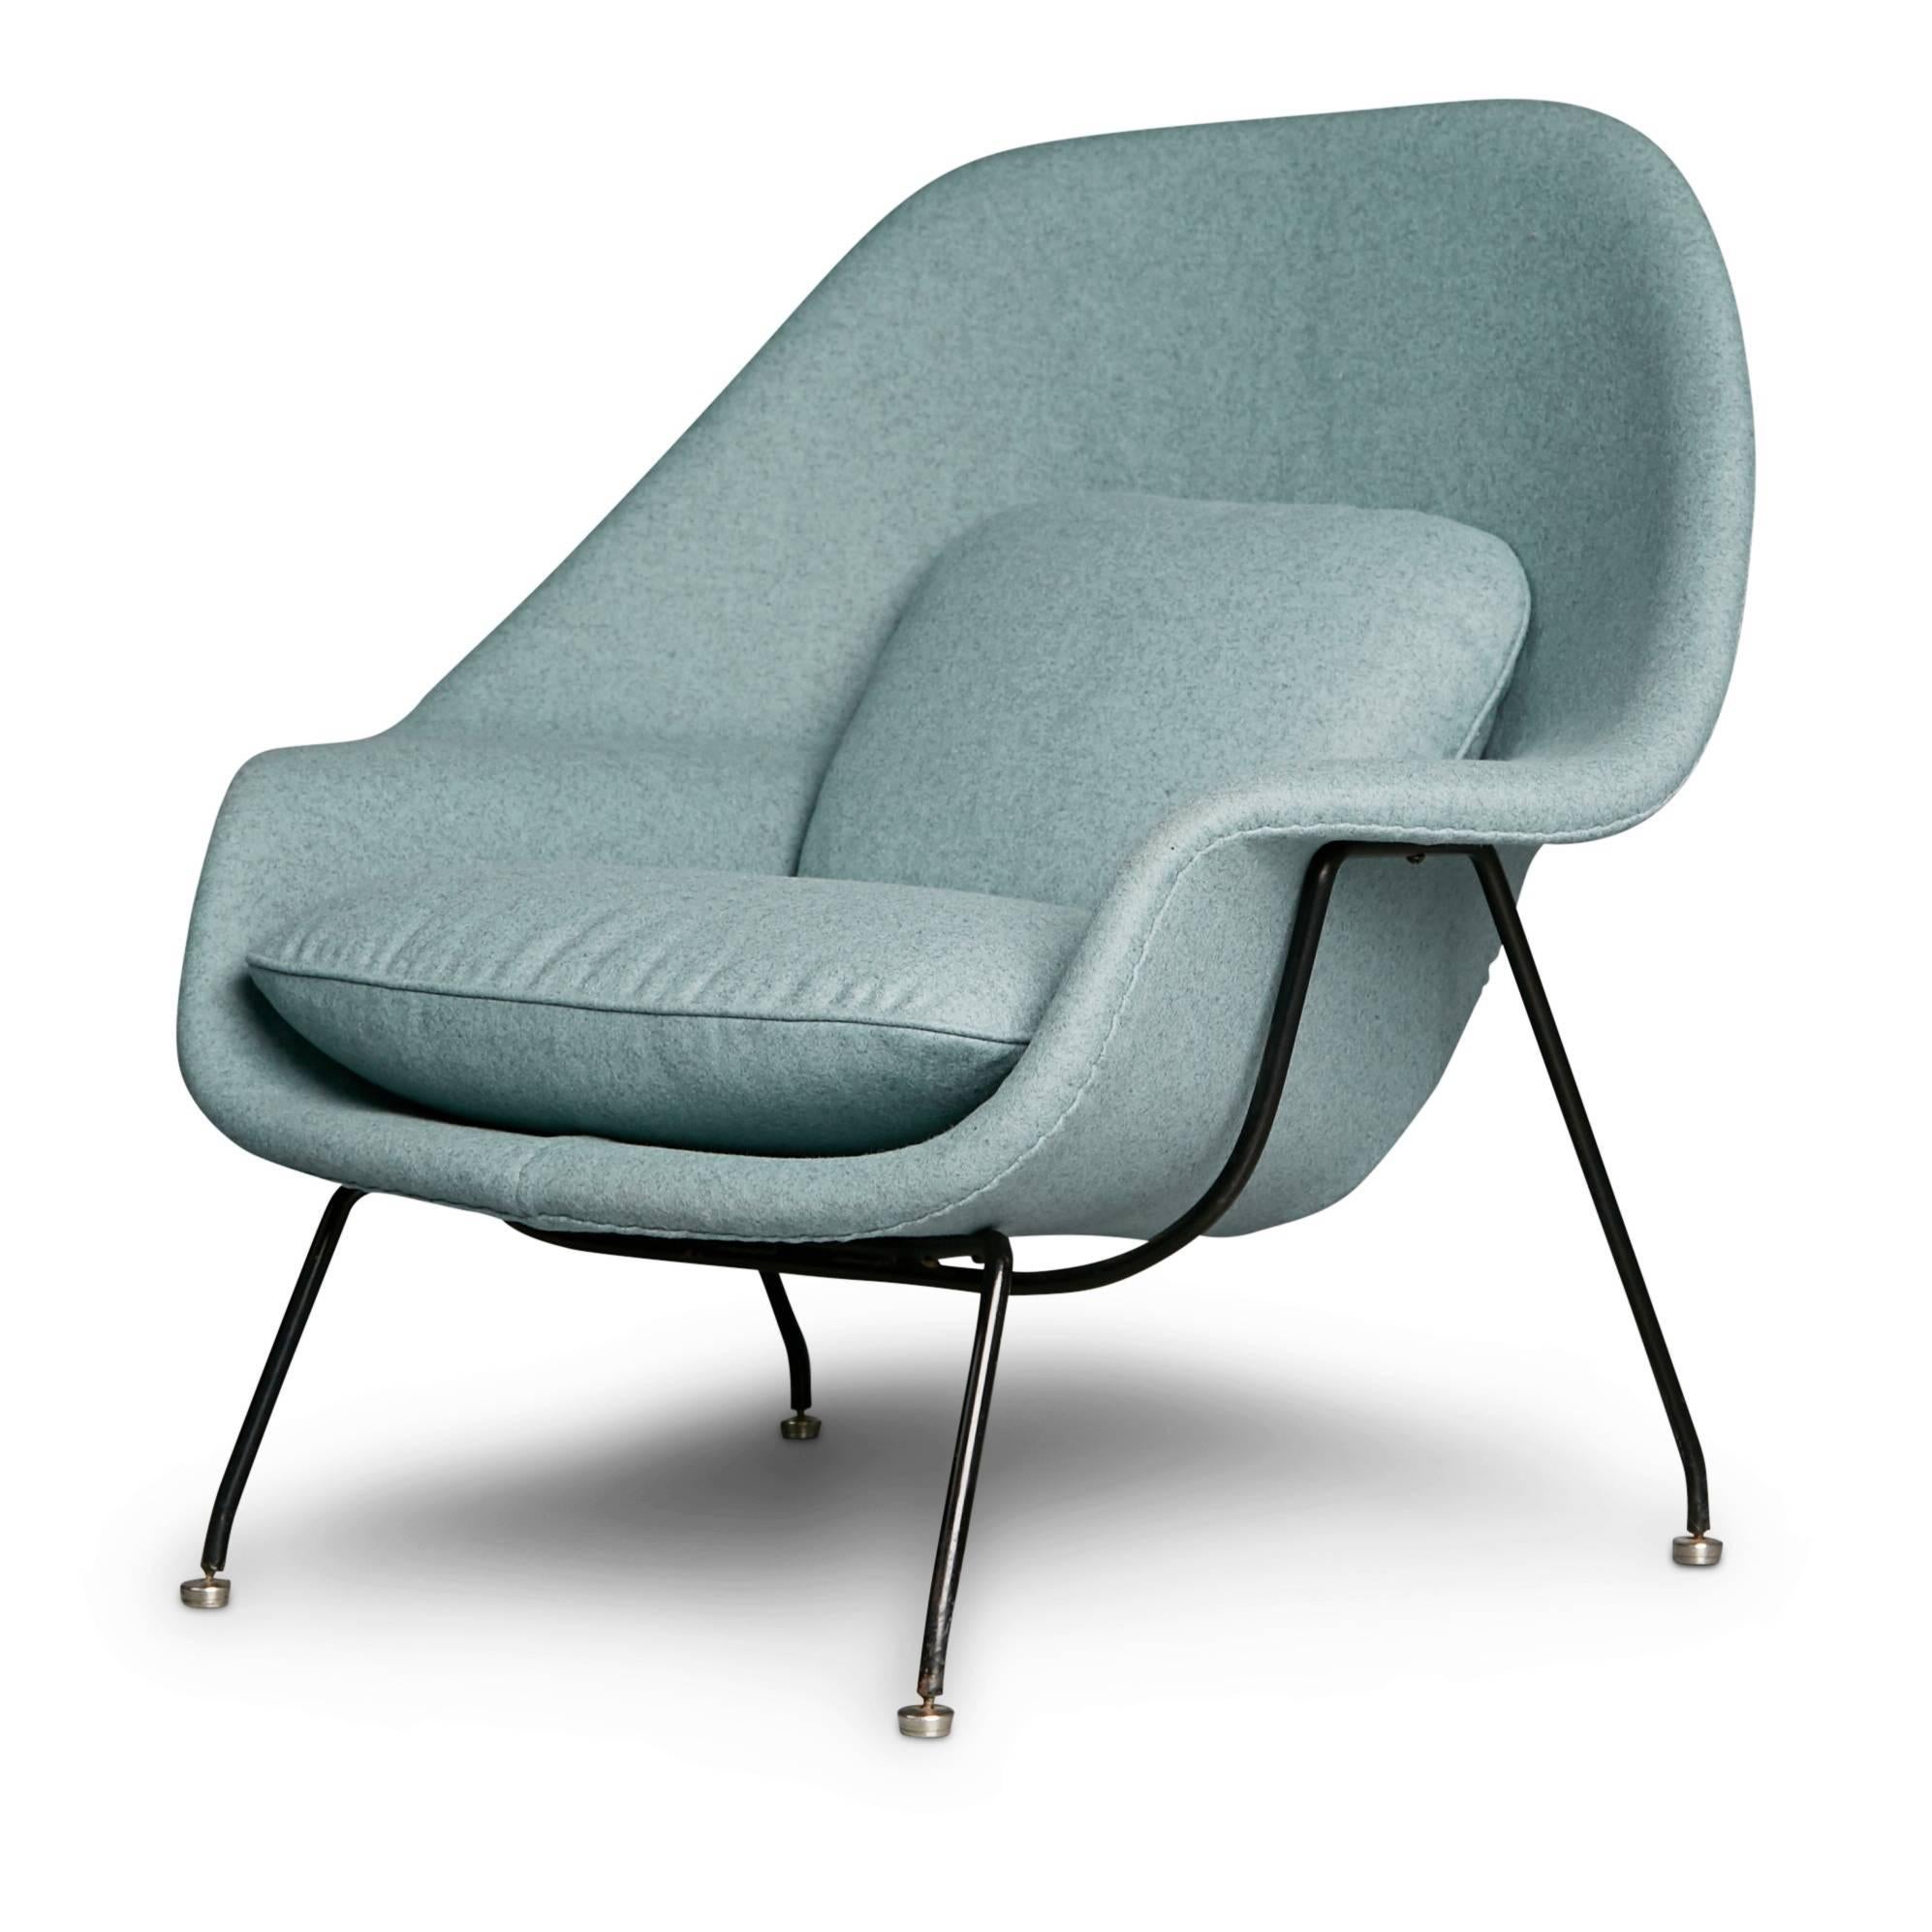 American Newly Upholstered Womb Chair and Ottoman by Eero Saarinen for Knoll, circa 1950